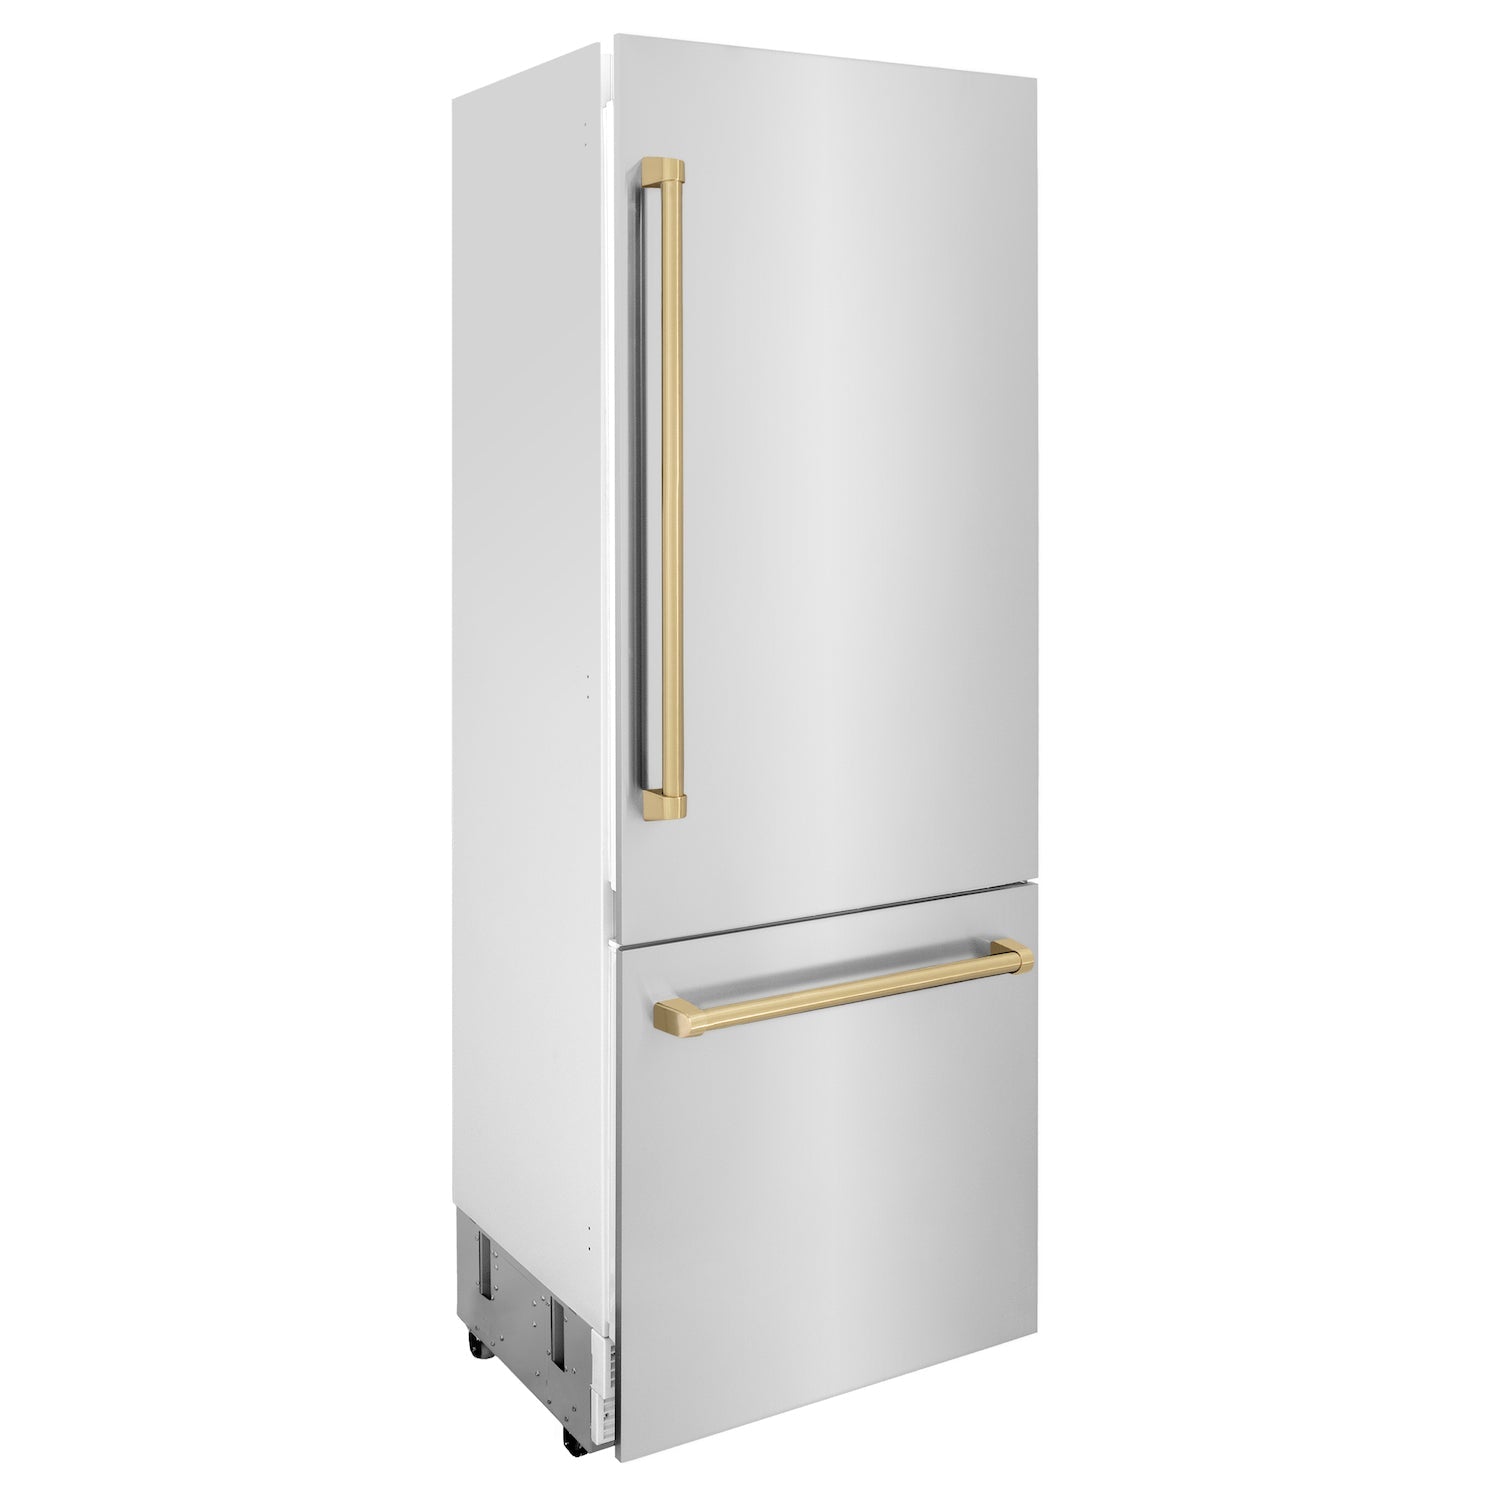 ZLINE 30" Autograph Edition Built-in 2-Door Bottom Freezer Refrigerator - Stainless Steel with Accents, Internal Water and Ice Dispenser